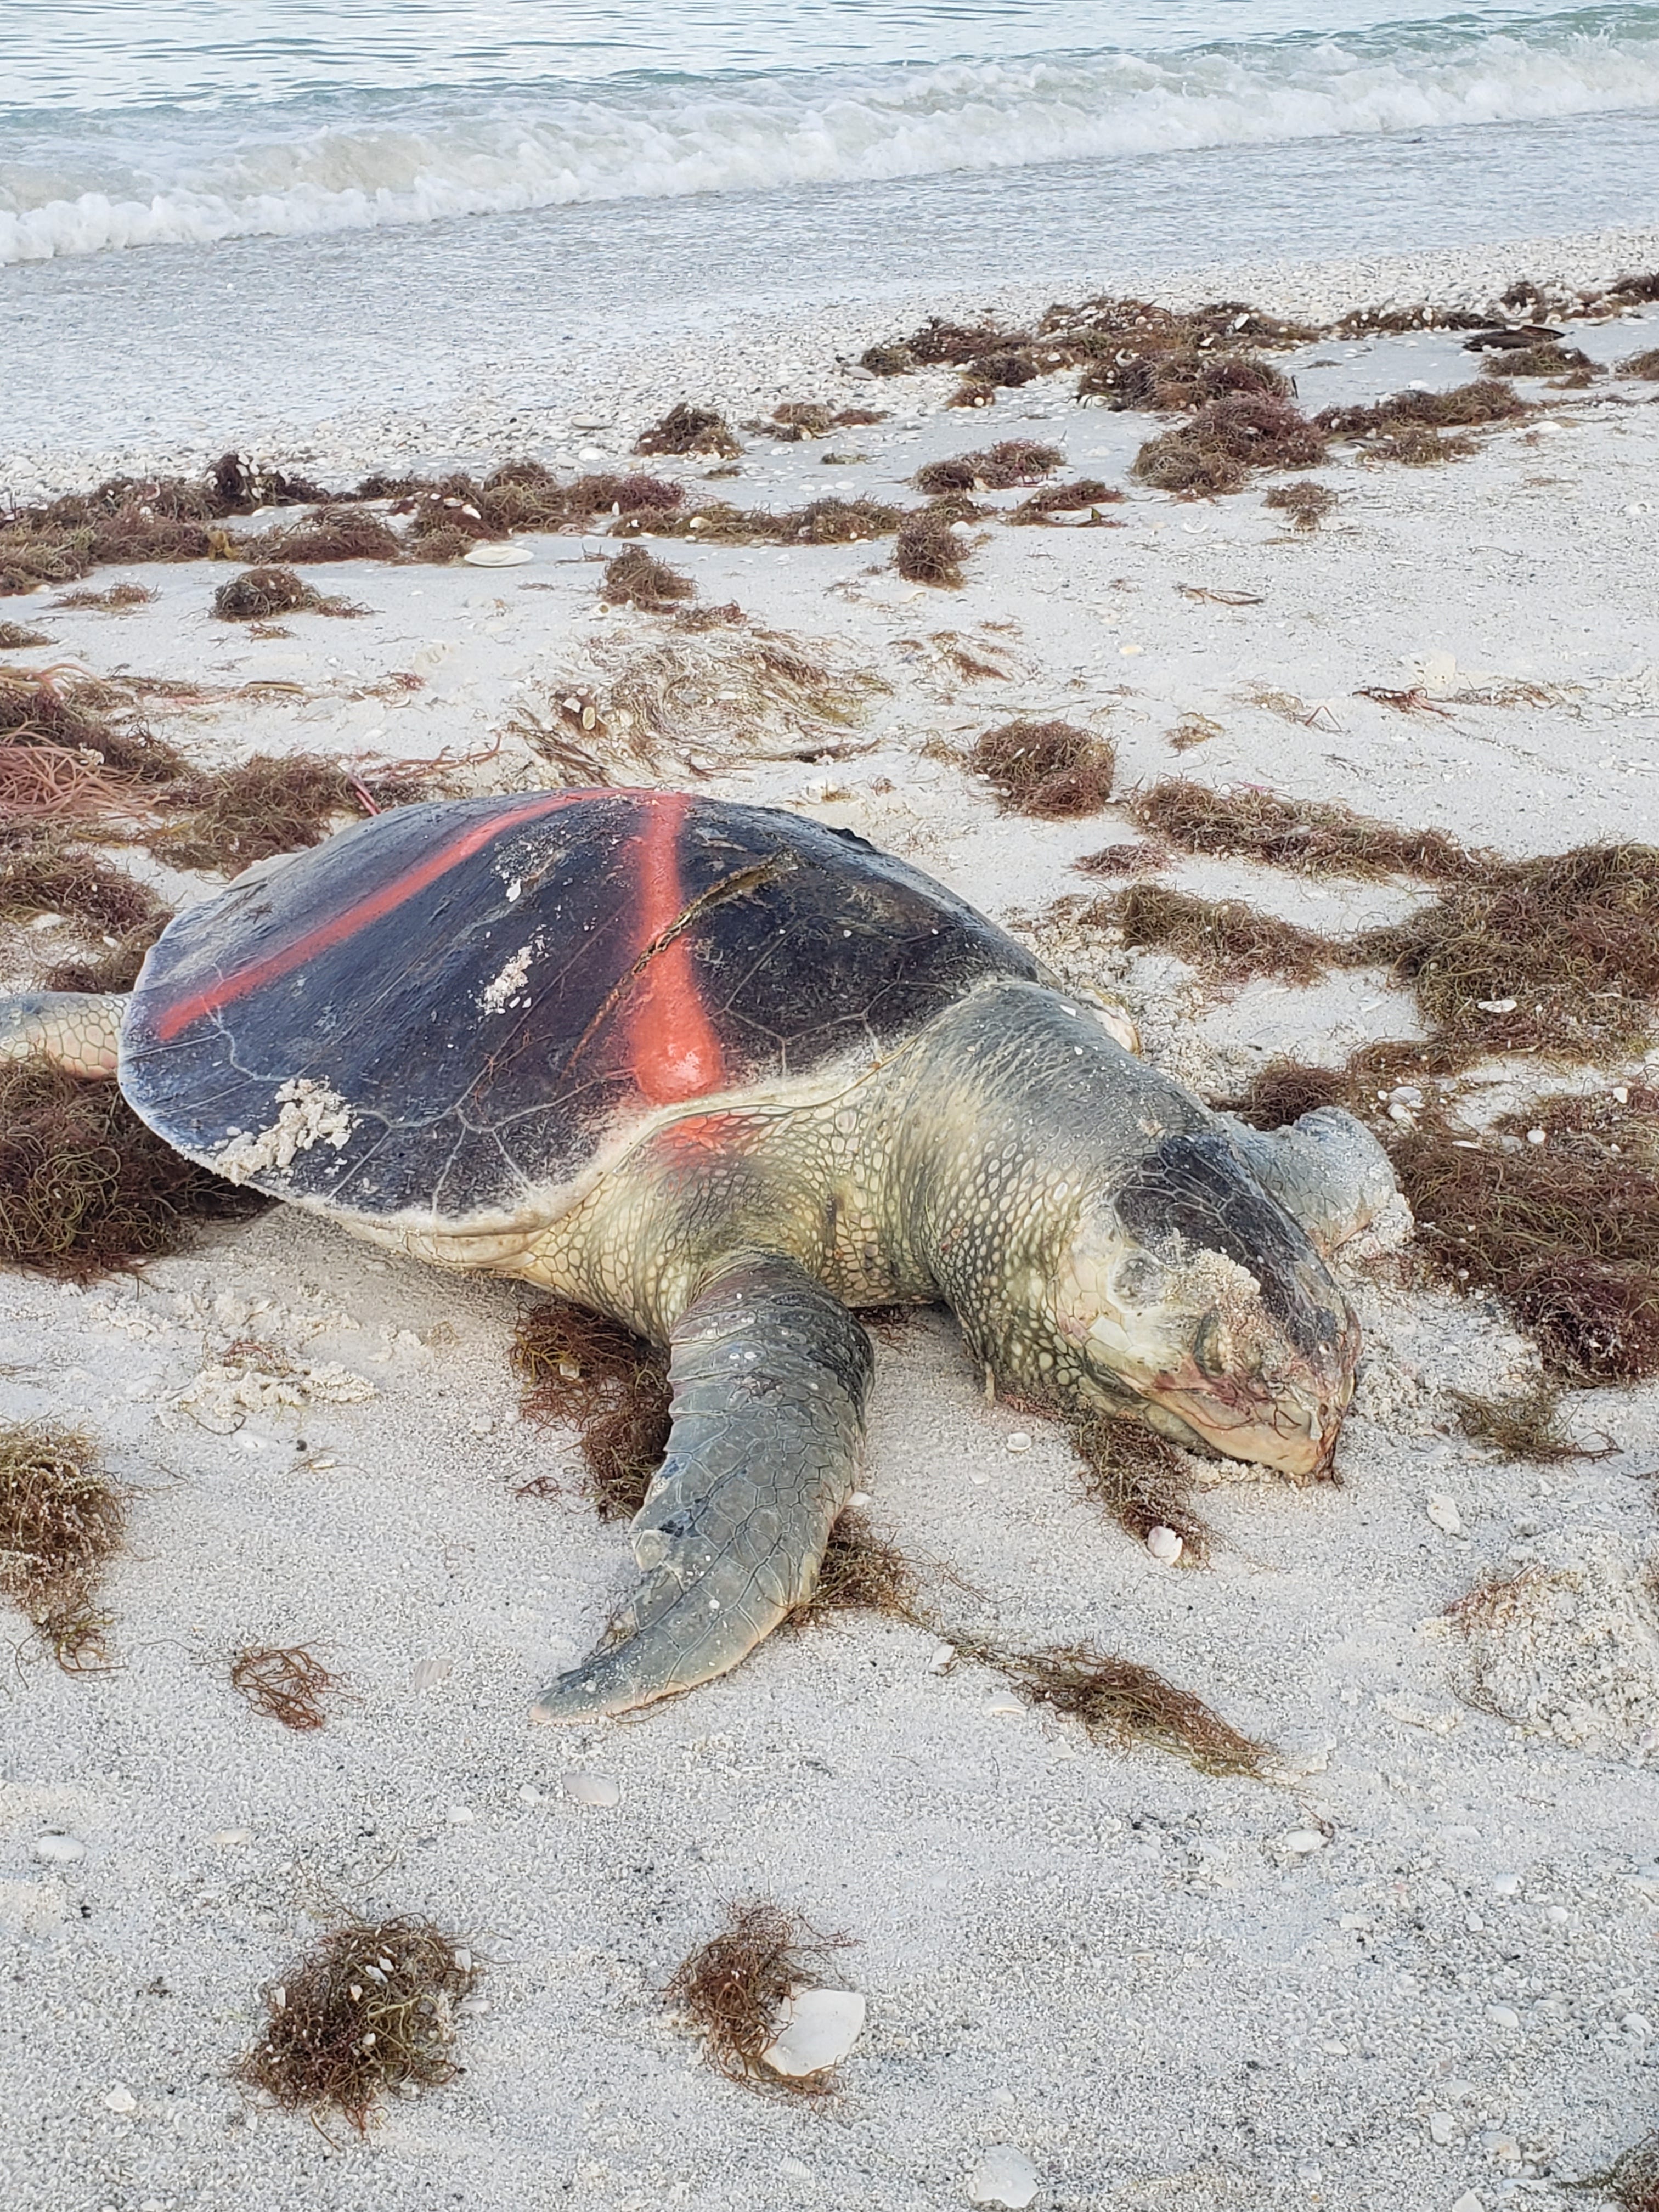 A dead sea turtle was found by Collier County turtle patrol on Big Marco Pass on Oct. 9, according to Brittany Piersma, bird biologist for Audubon of the Western Everglades. "They mark the ones they find with paint so they do not recount them," wrote in an email to the Eagle. Dozens of dead fish washed ashore Wednesday on Marco Island as government agencies alerted of high levels of the organism that causes the red tide.